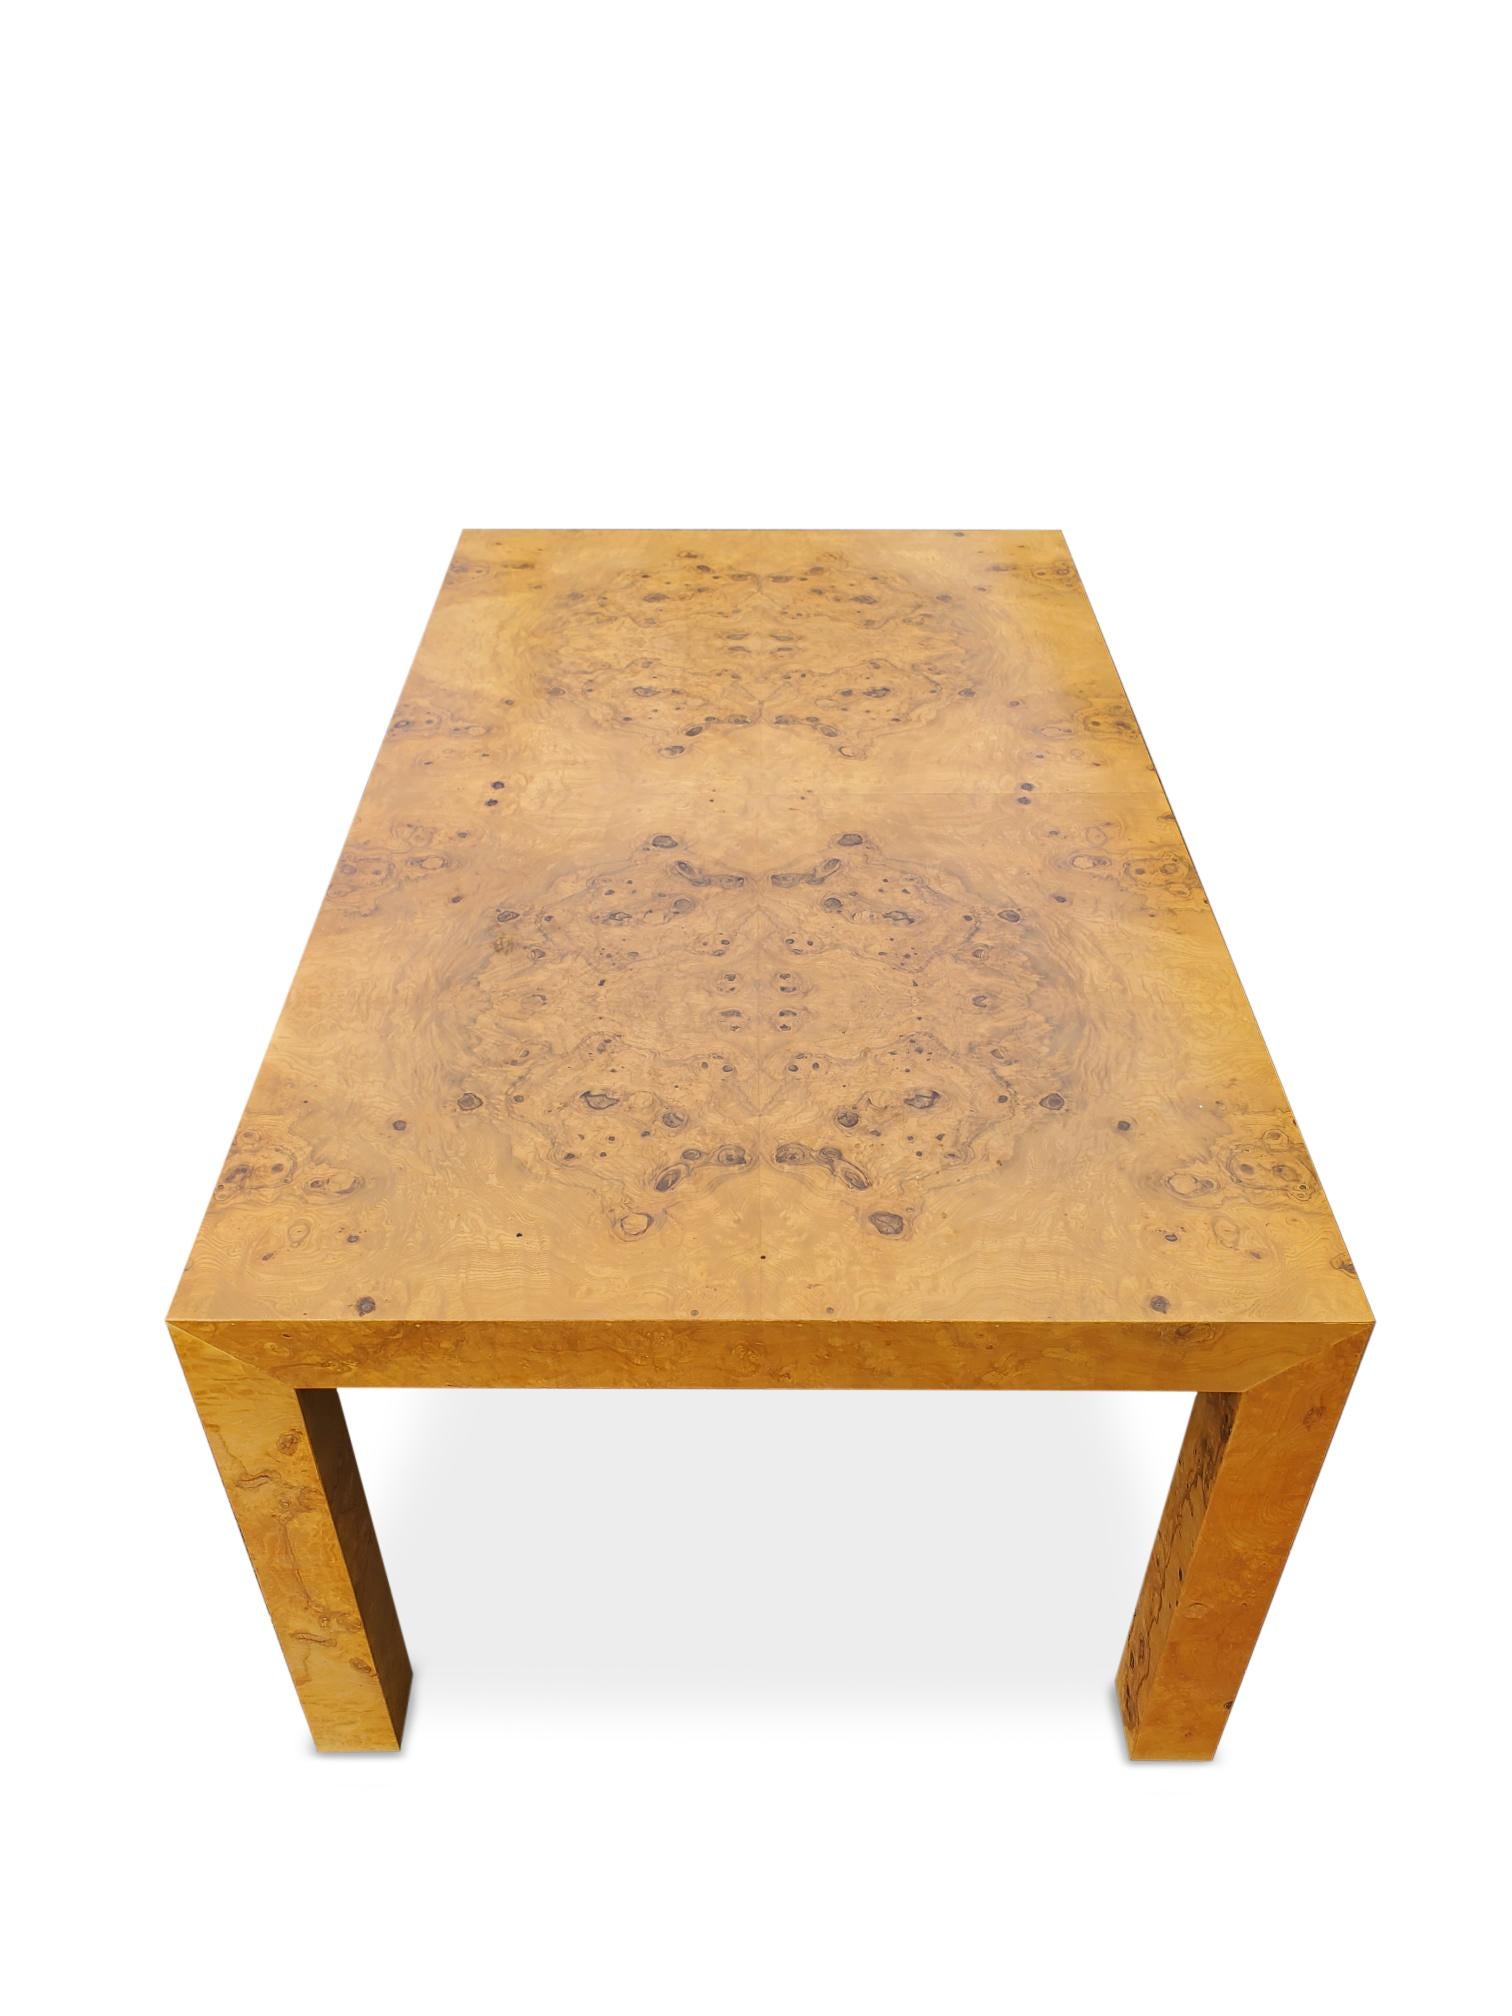 Milo Baughman Olivewood Extension Dining Table  For Sale 8